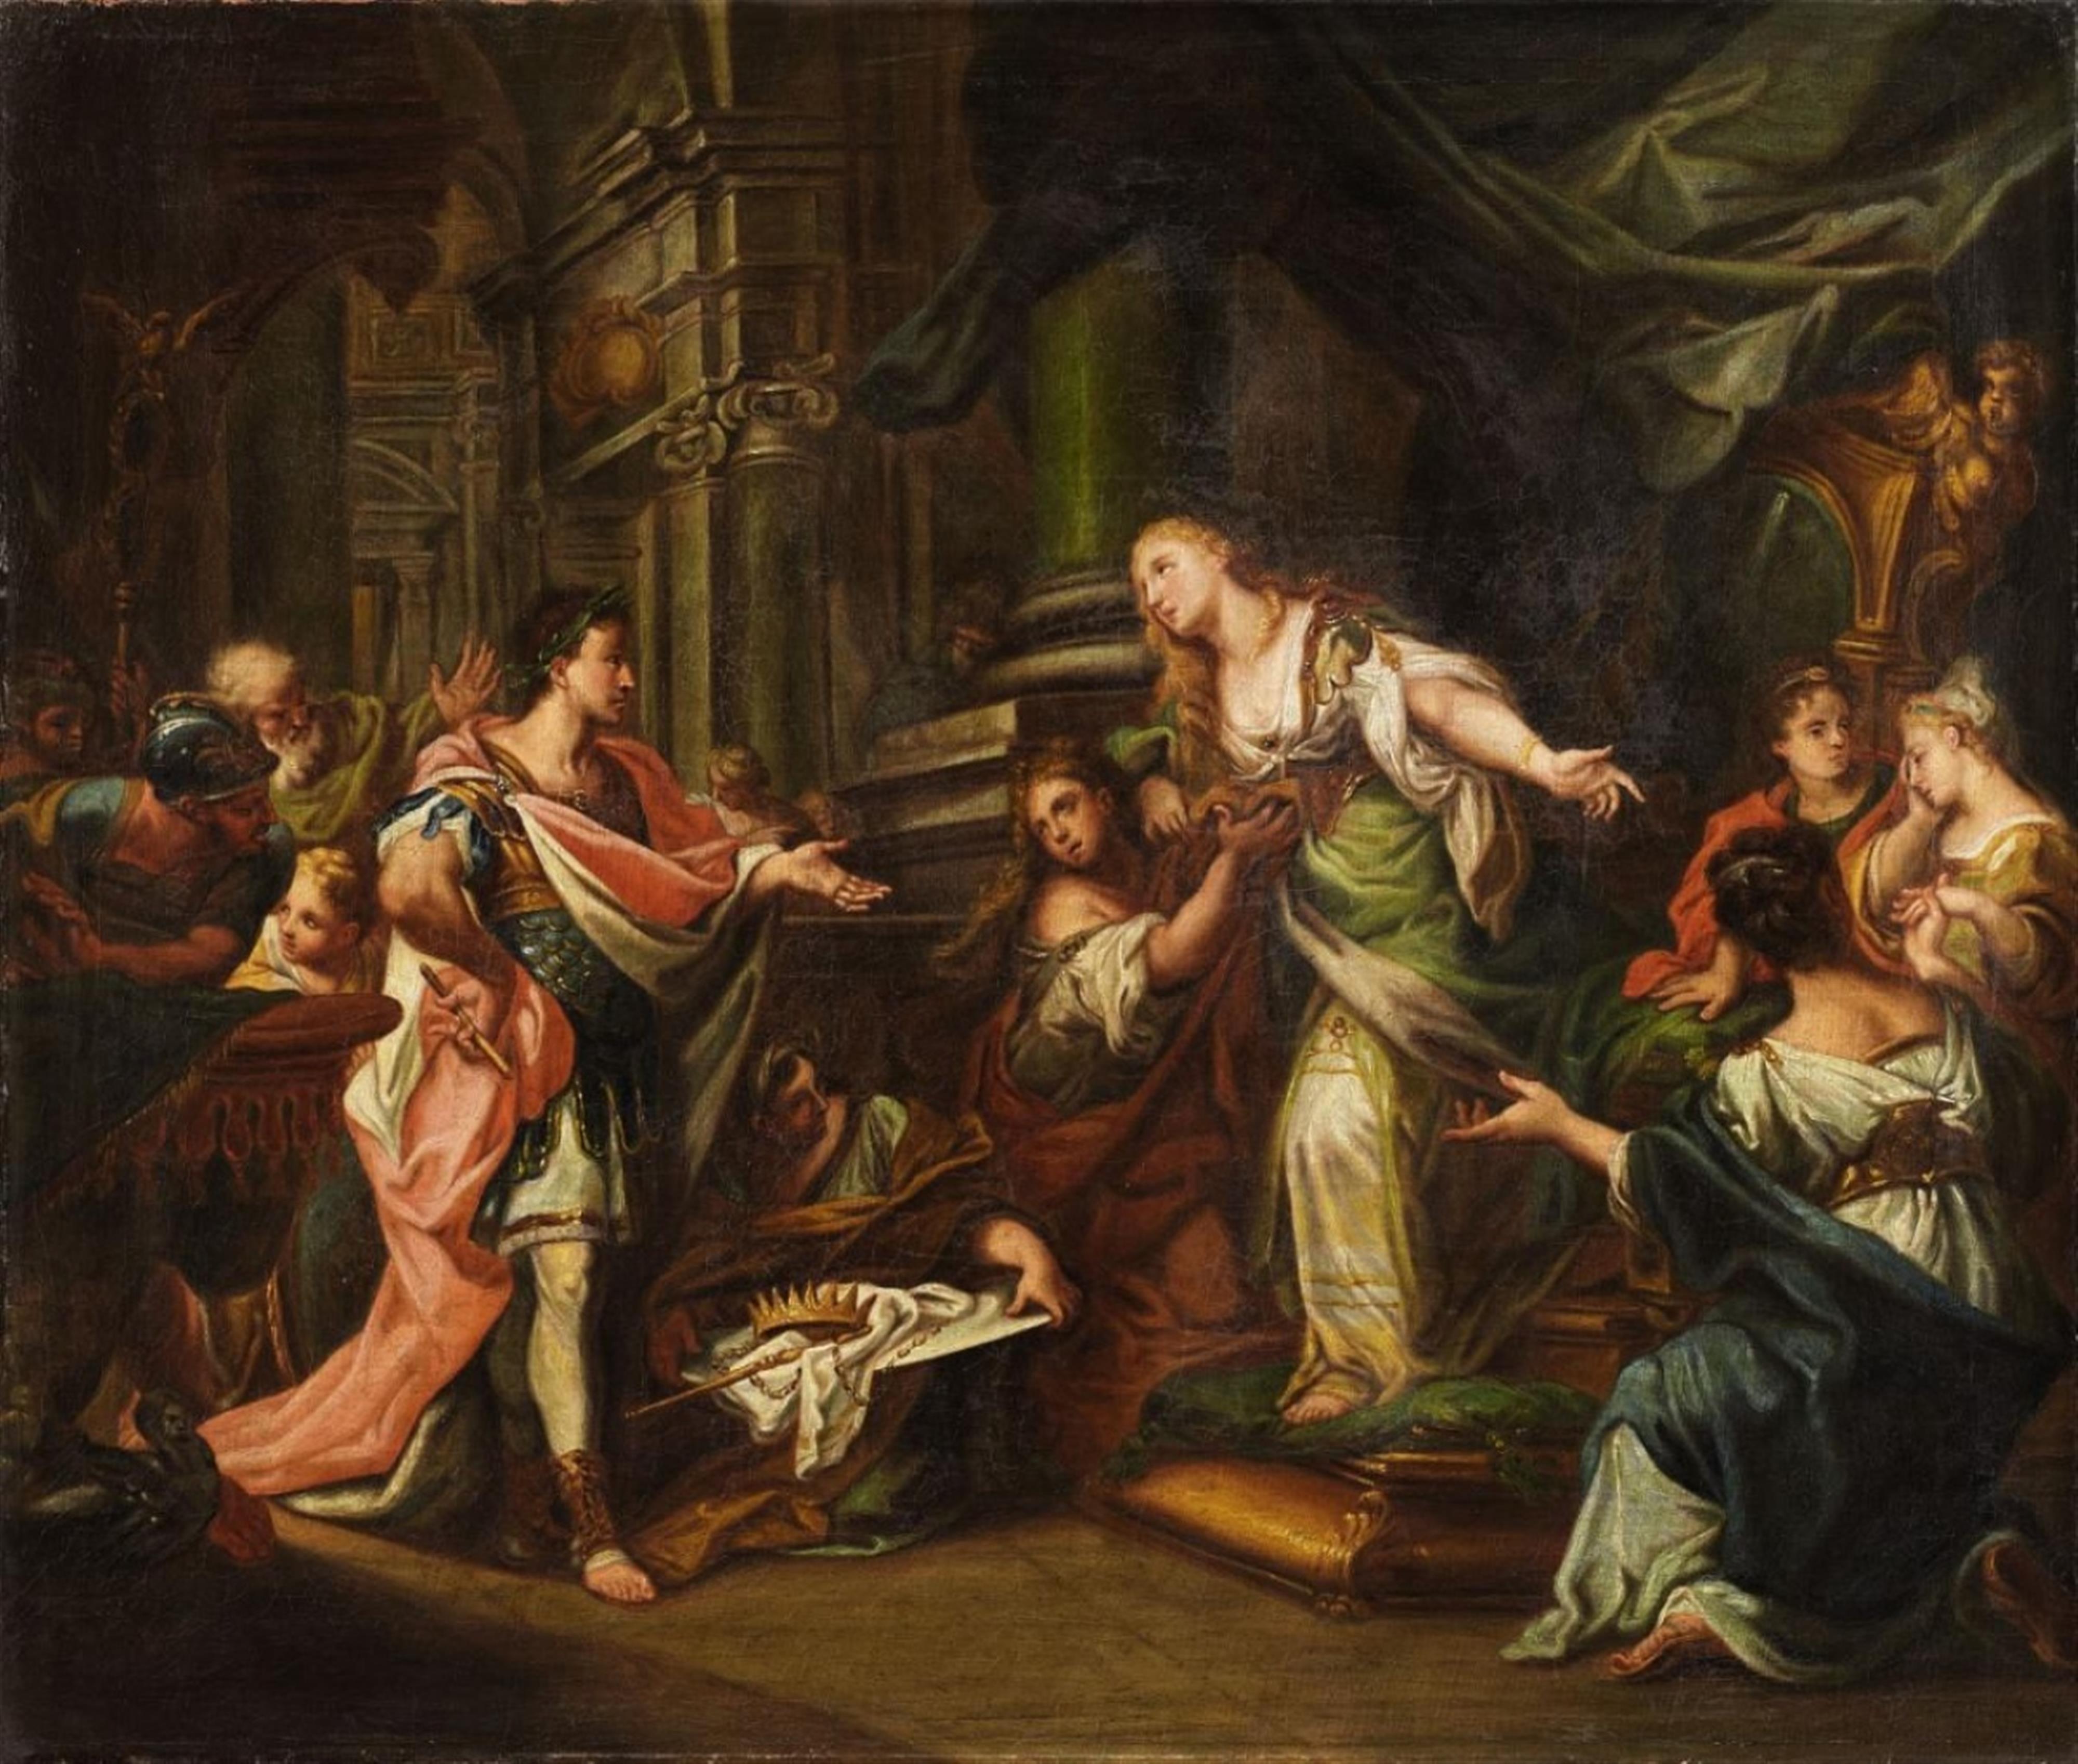 Unknown Artist, 17th century - Aeneas' Farewell to Dido (?) - image-1